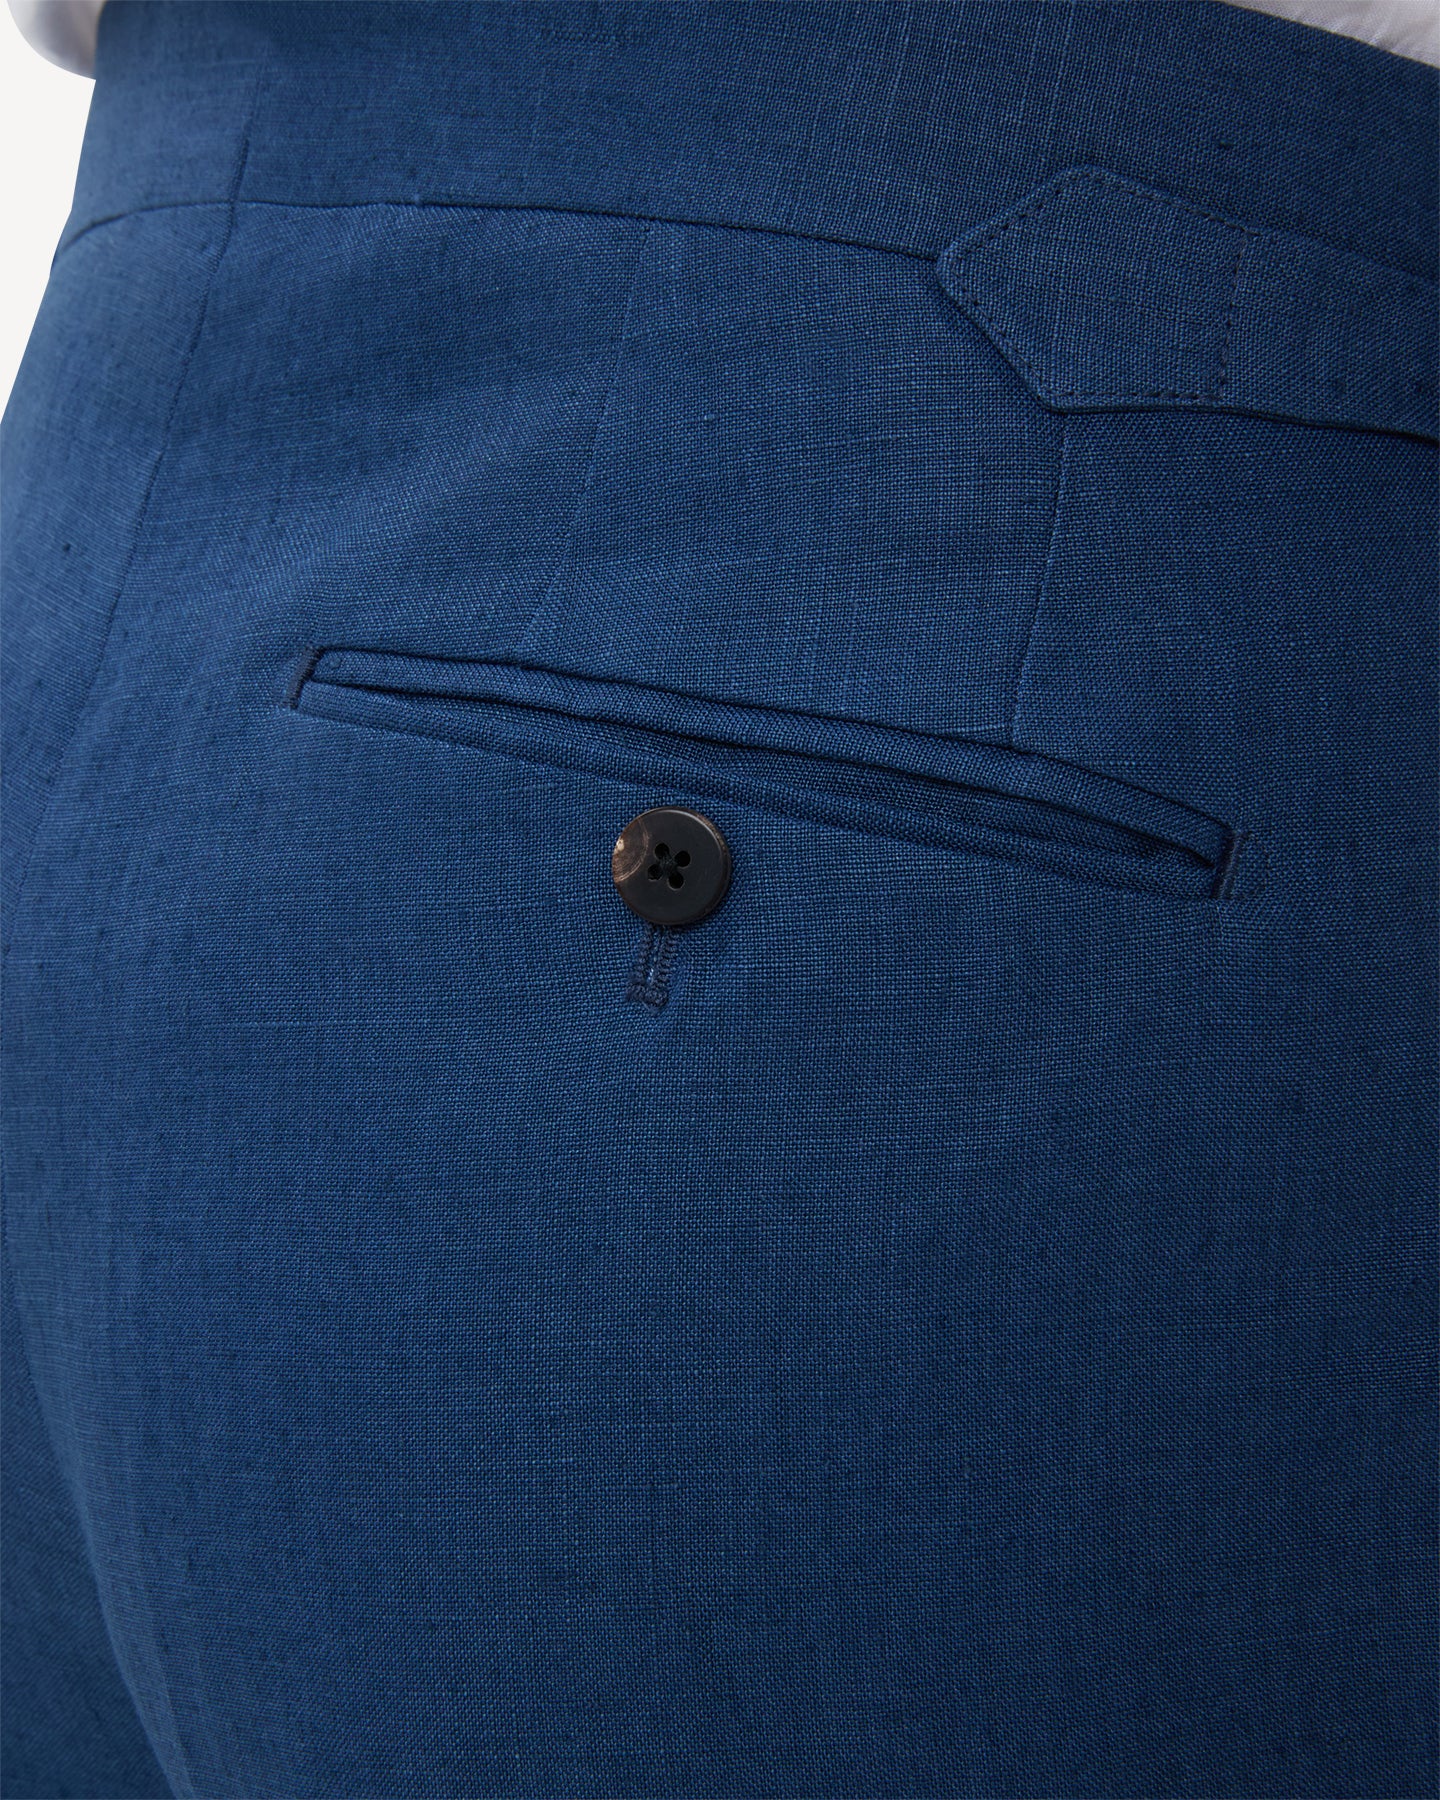 Blueberry linen trousers with horn buttons